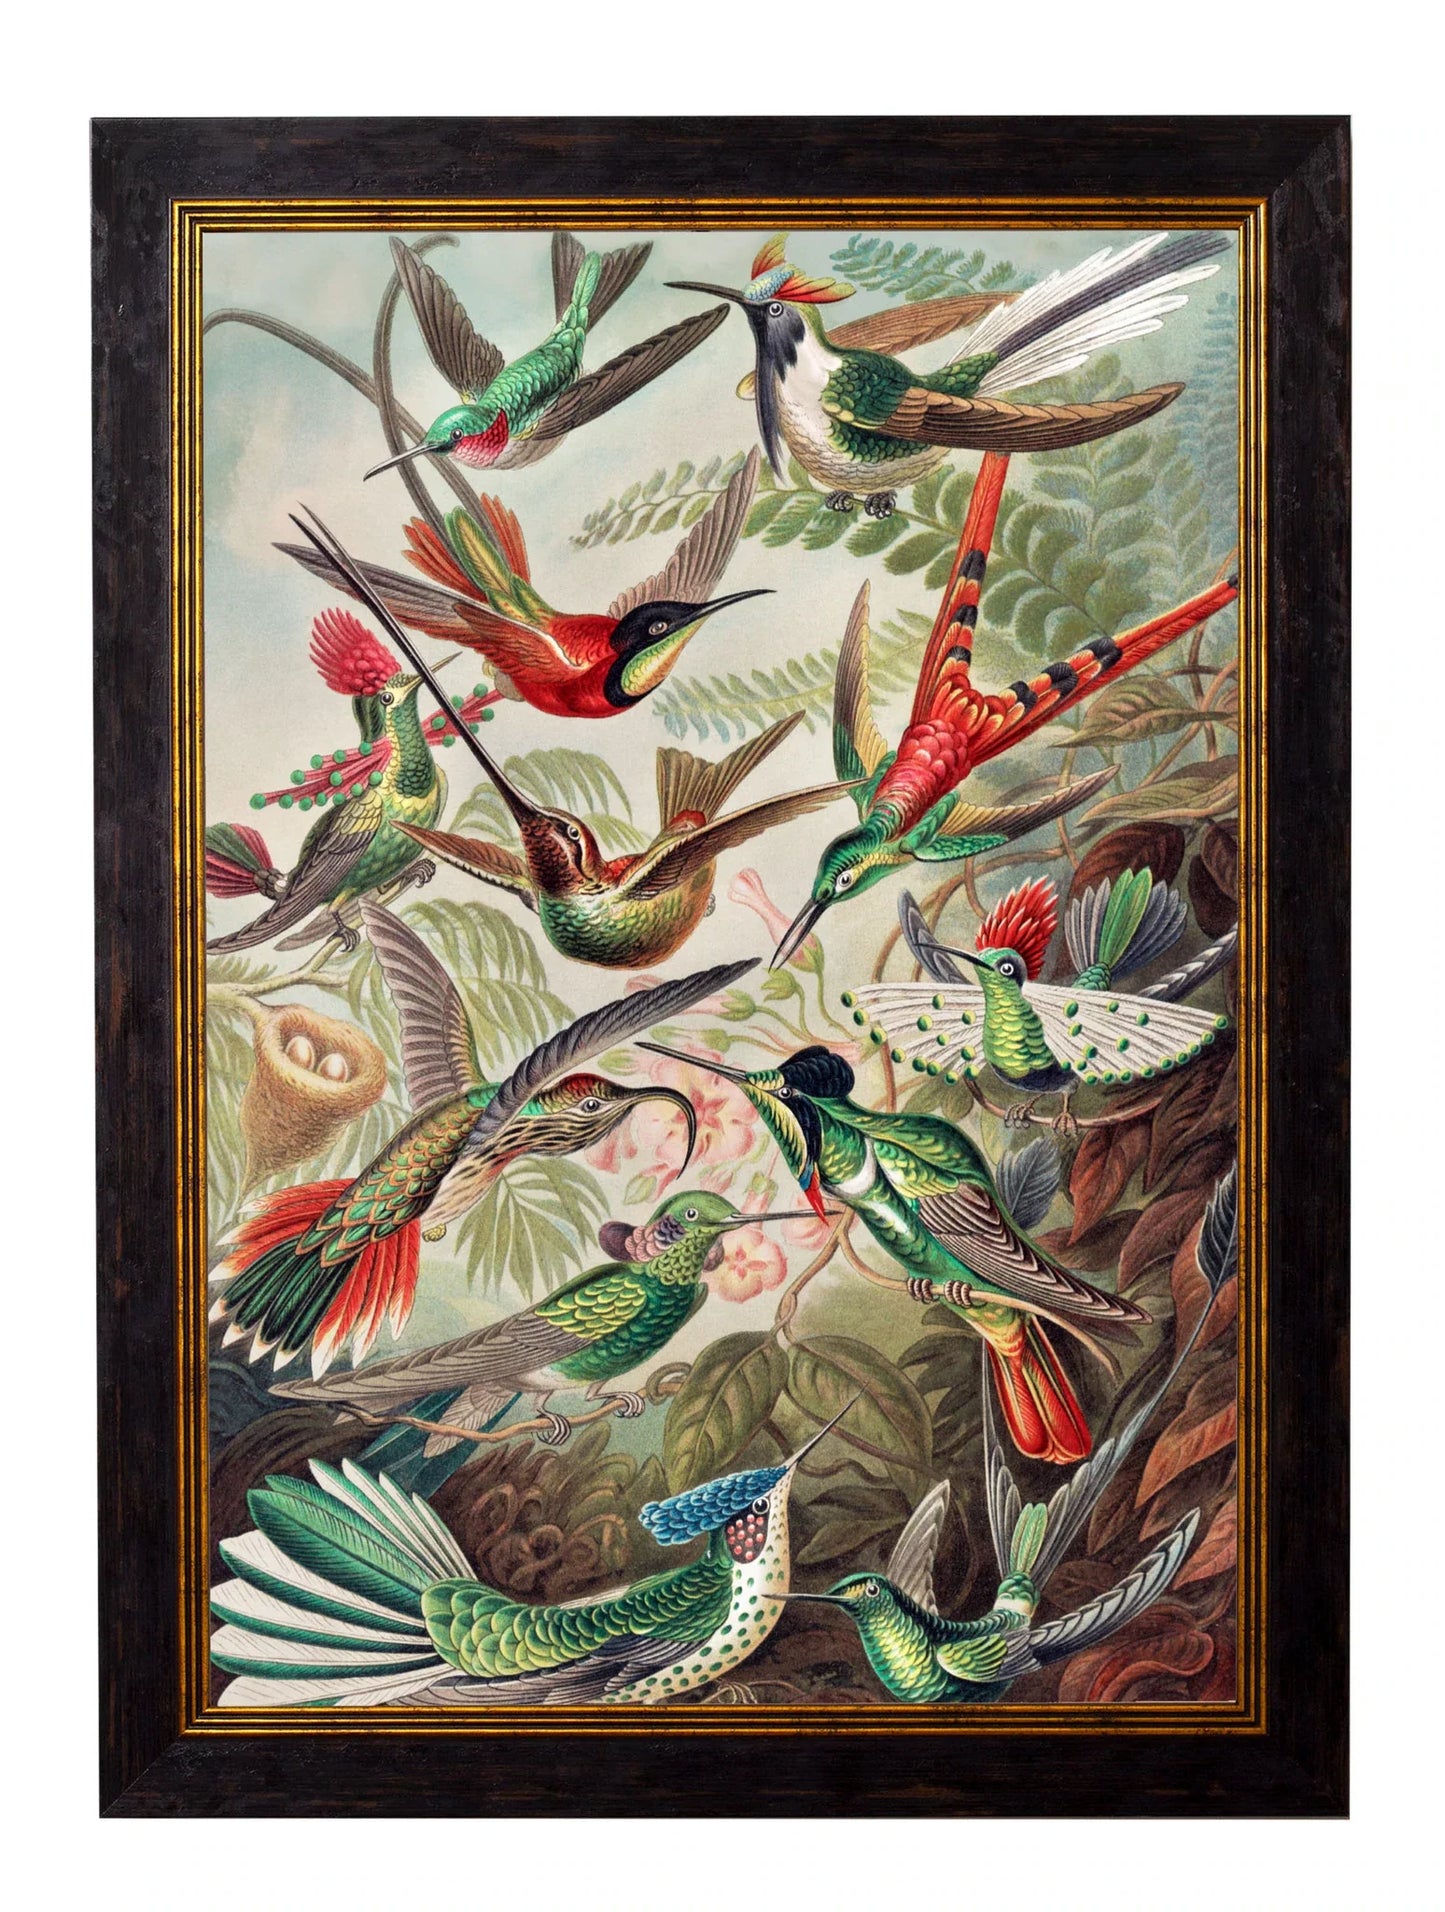 C.1904 Haeckel Hummingbirds' Frame for sale - Woodcock and Cavendish